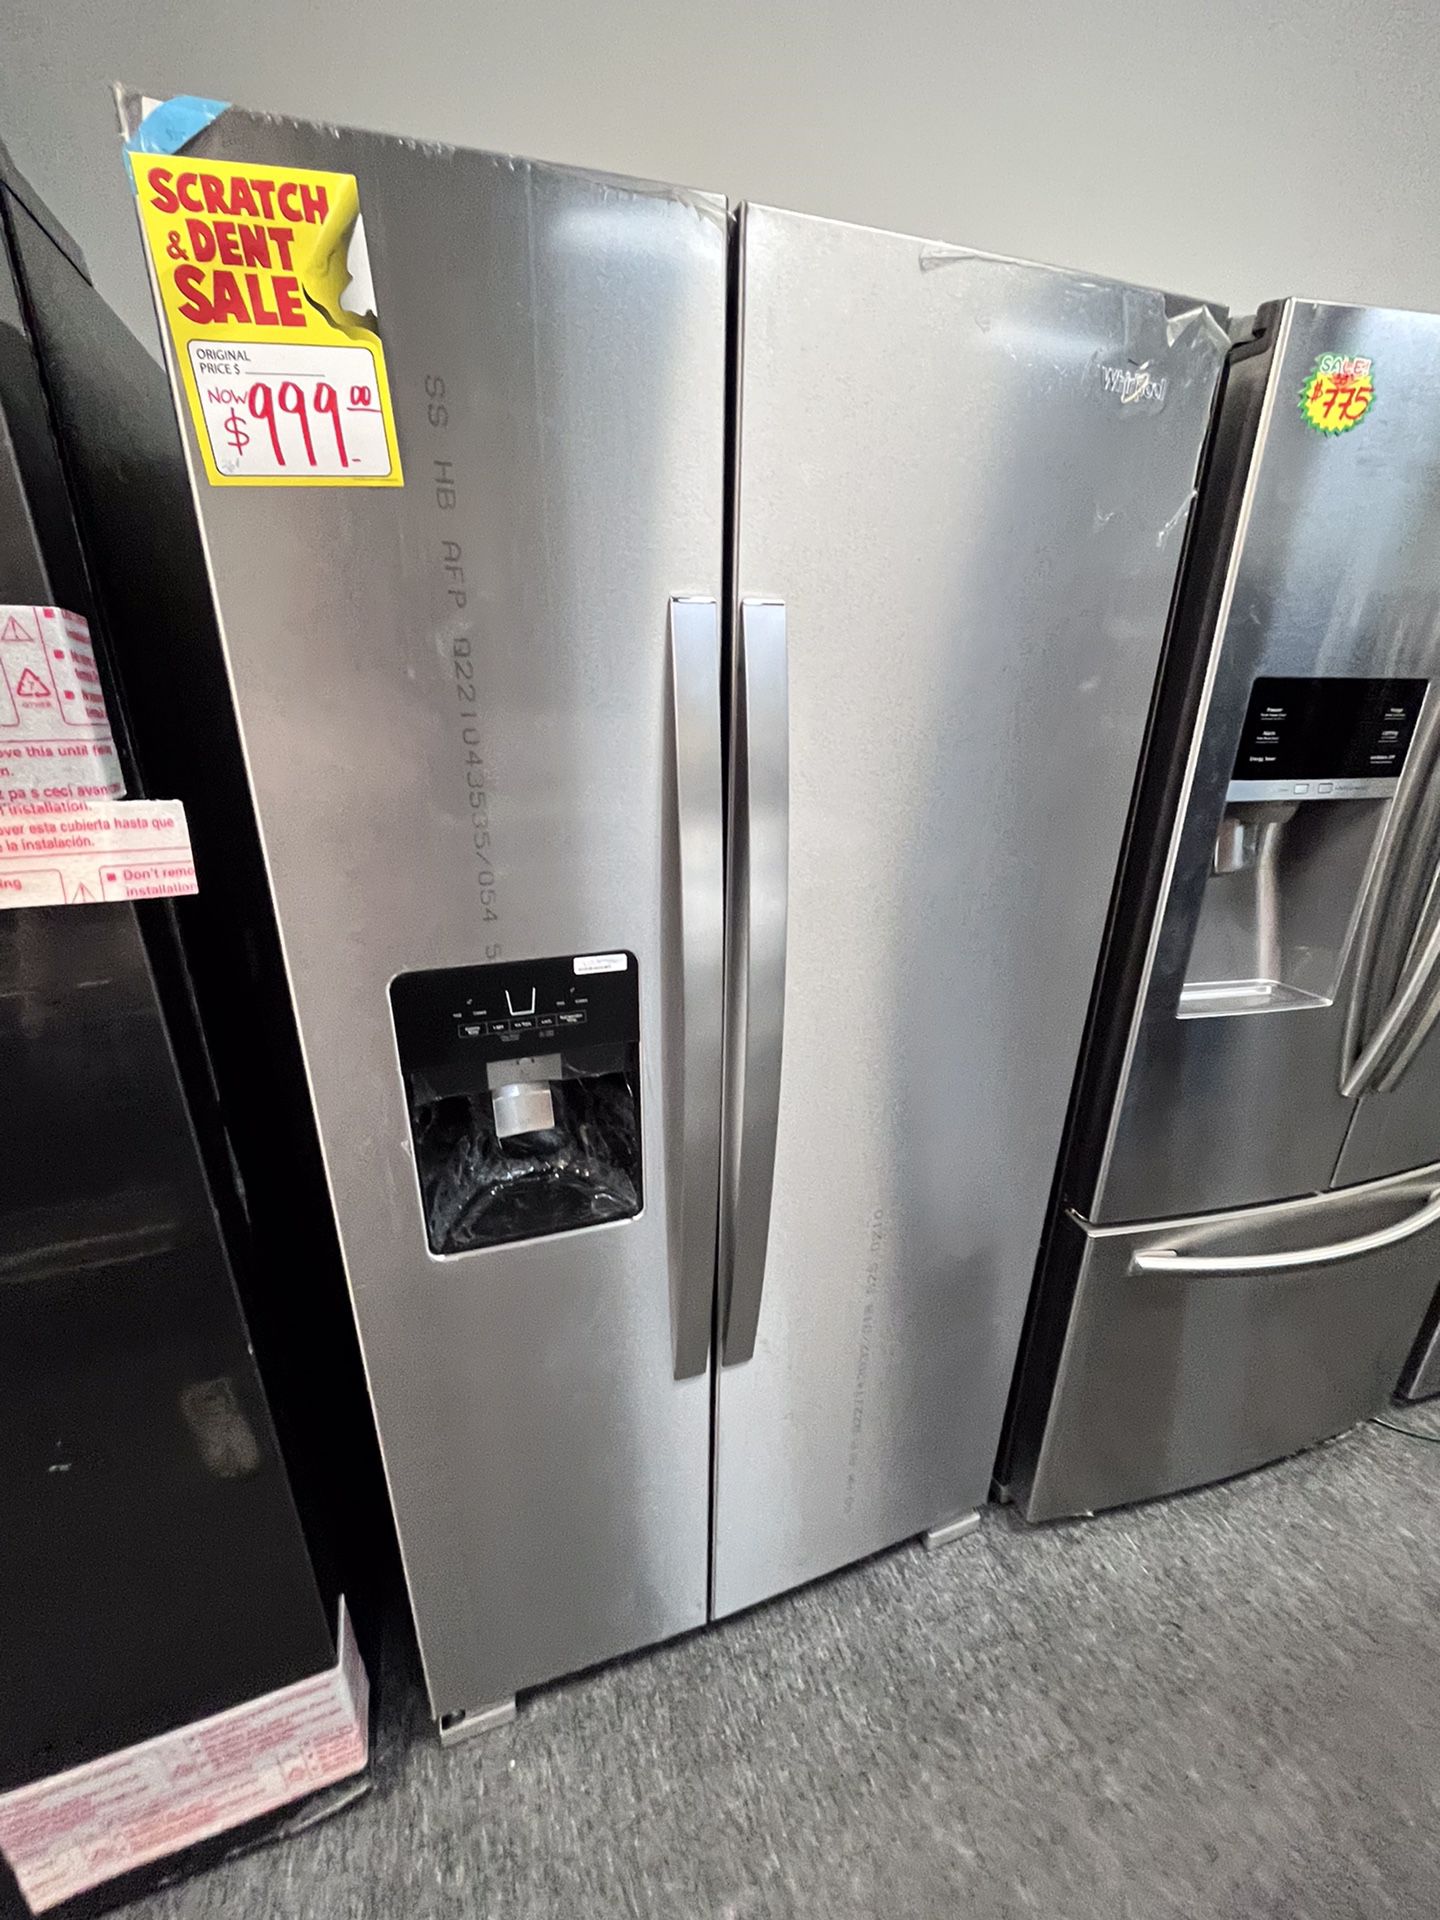 Black Friday sale‼️New Scratch&Dent Whirlpool 36” Side By Side Door Fridge With 1 Year Warranty Delivery availeble 